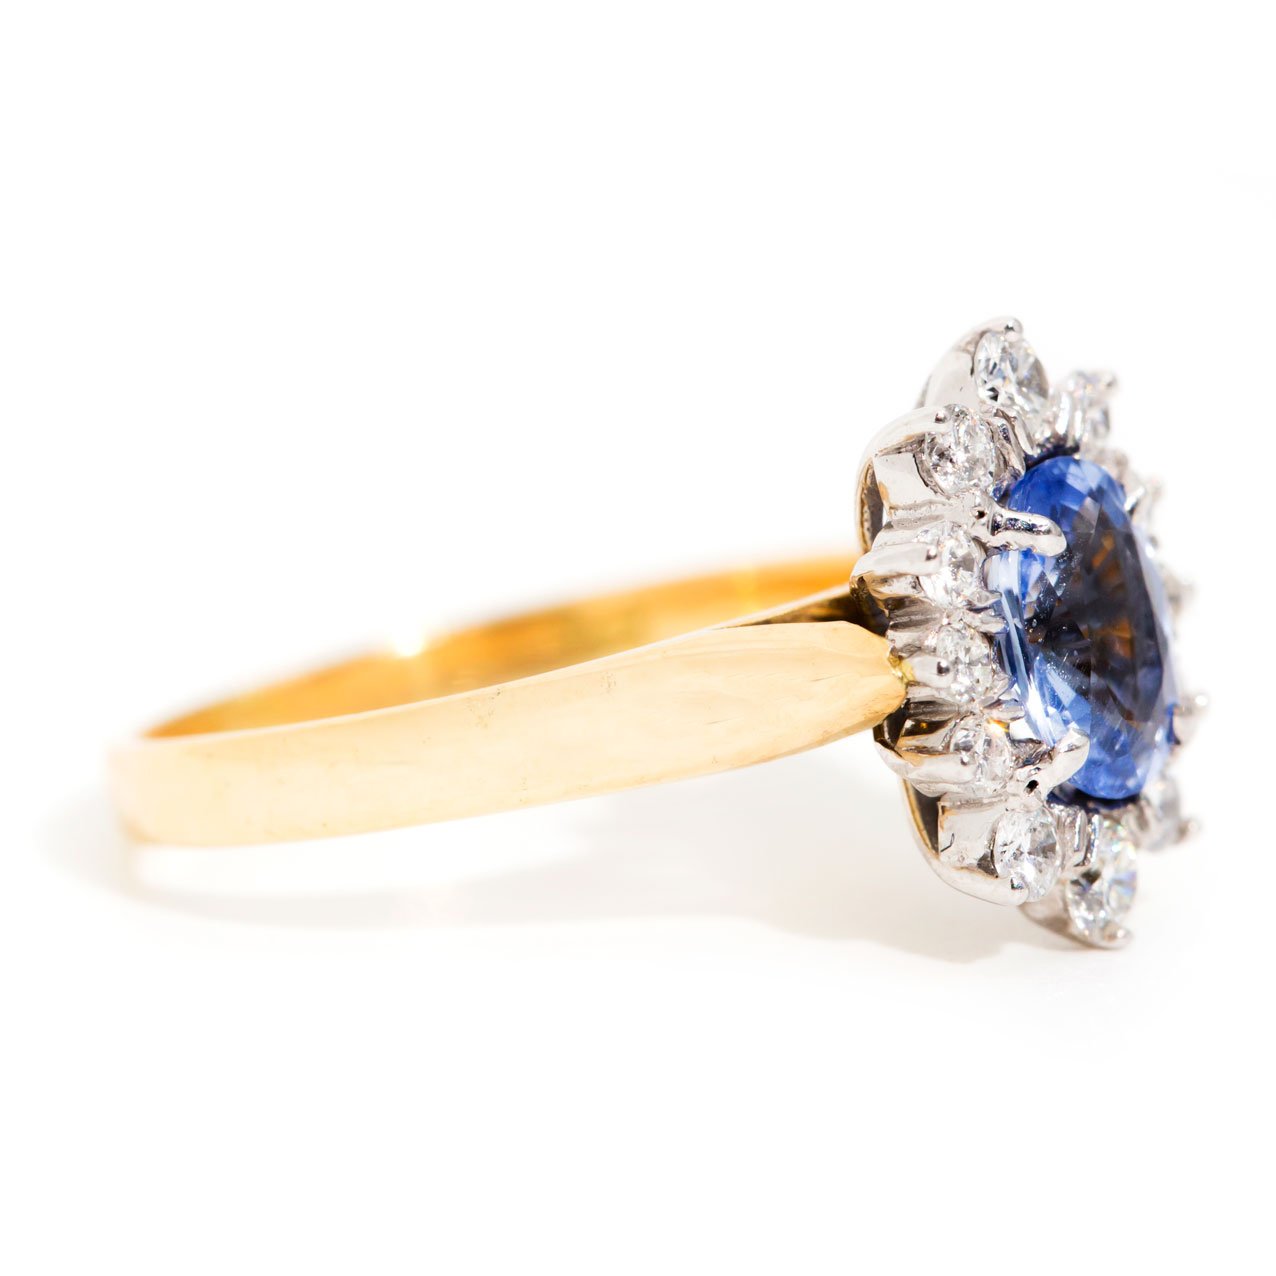 Harlow 18ct Gold Ceylon Sapphire & Diamond Vintage Halo Cluster Ring* Gemmo Rings Imperial Jewellery